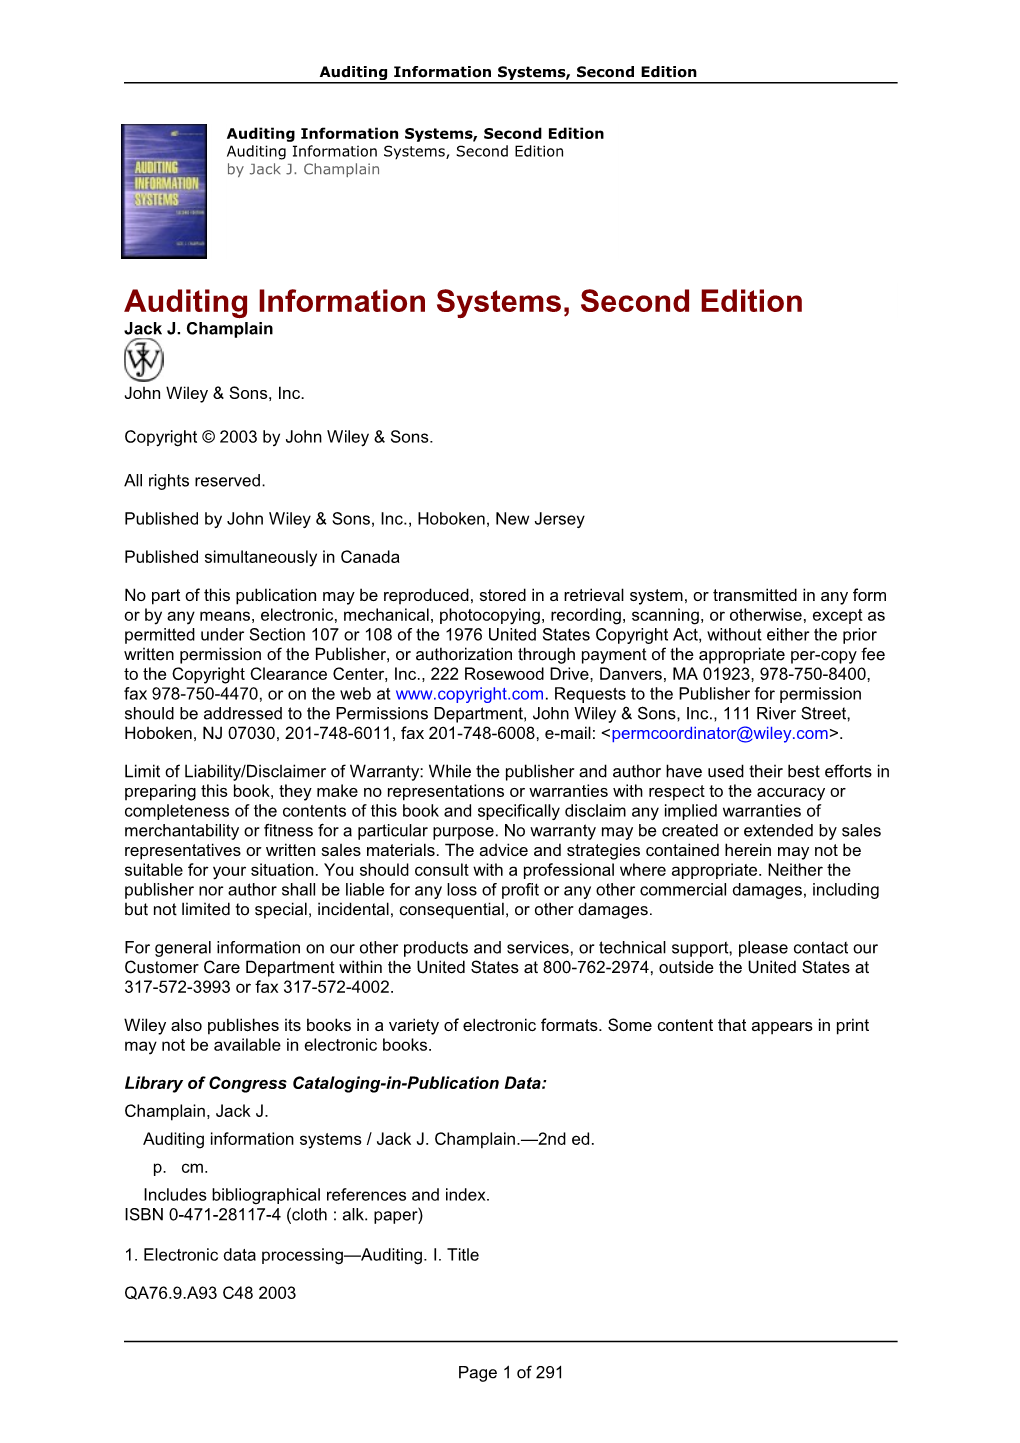 Auditing Information Systems, Second Edition